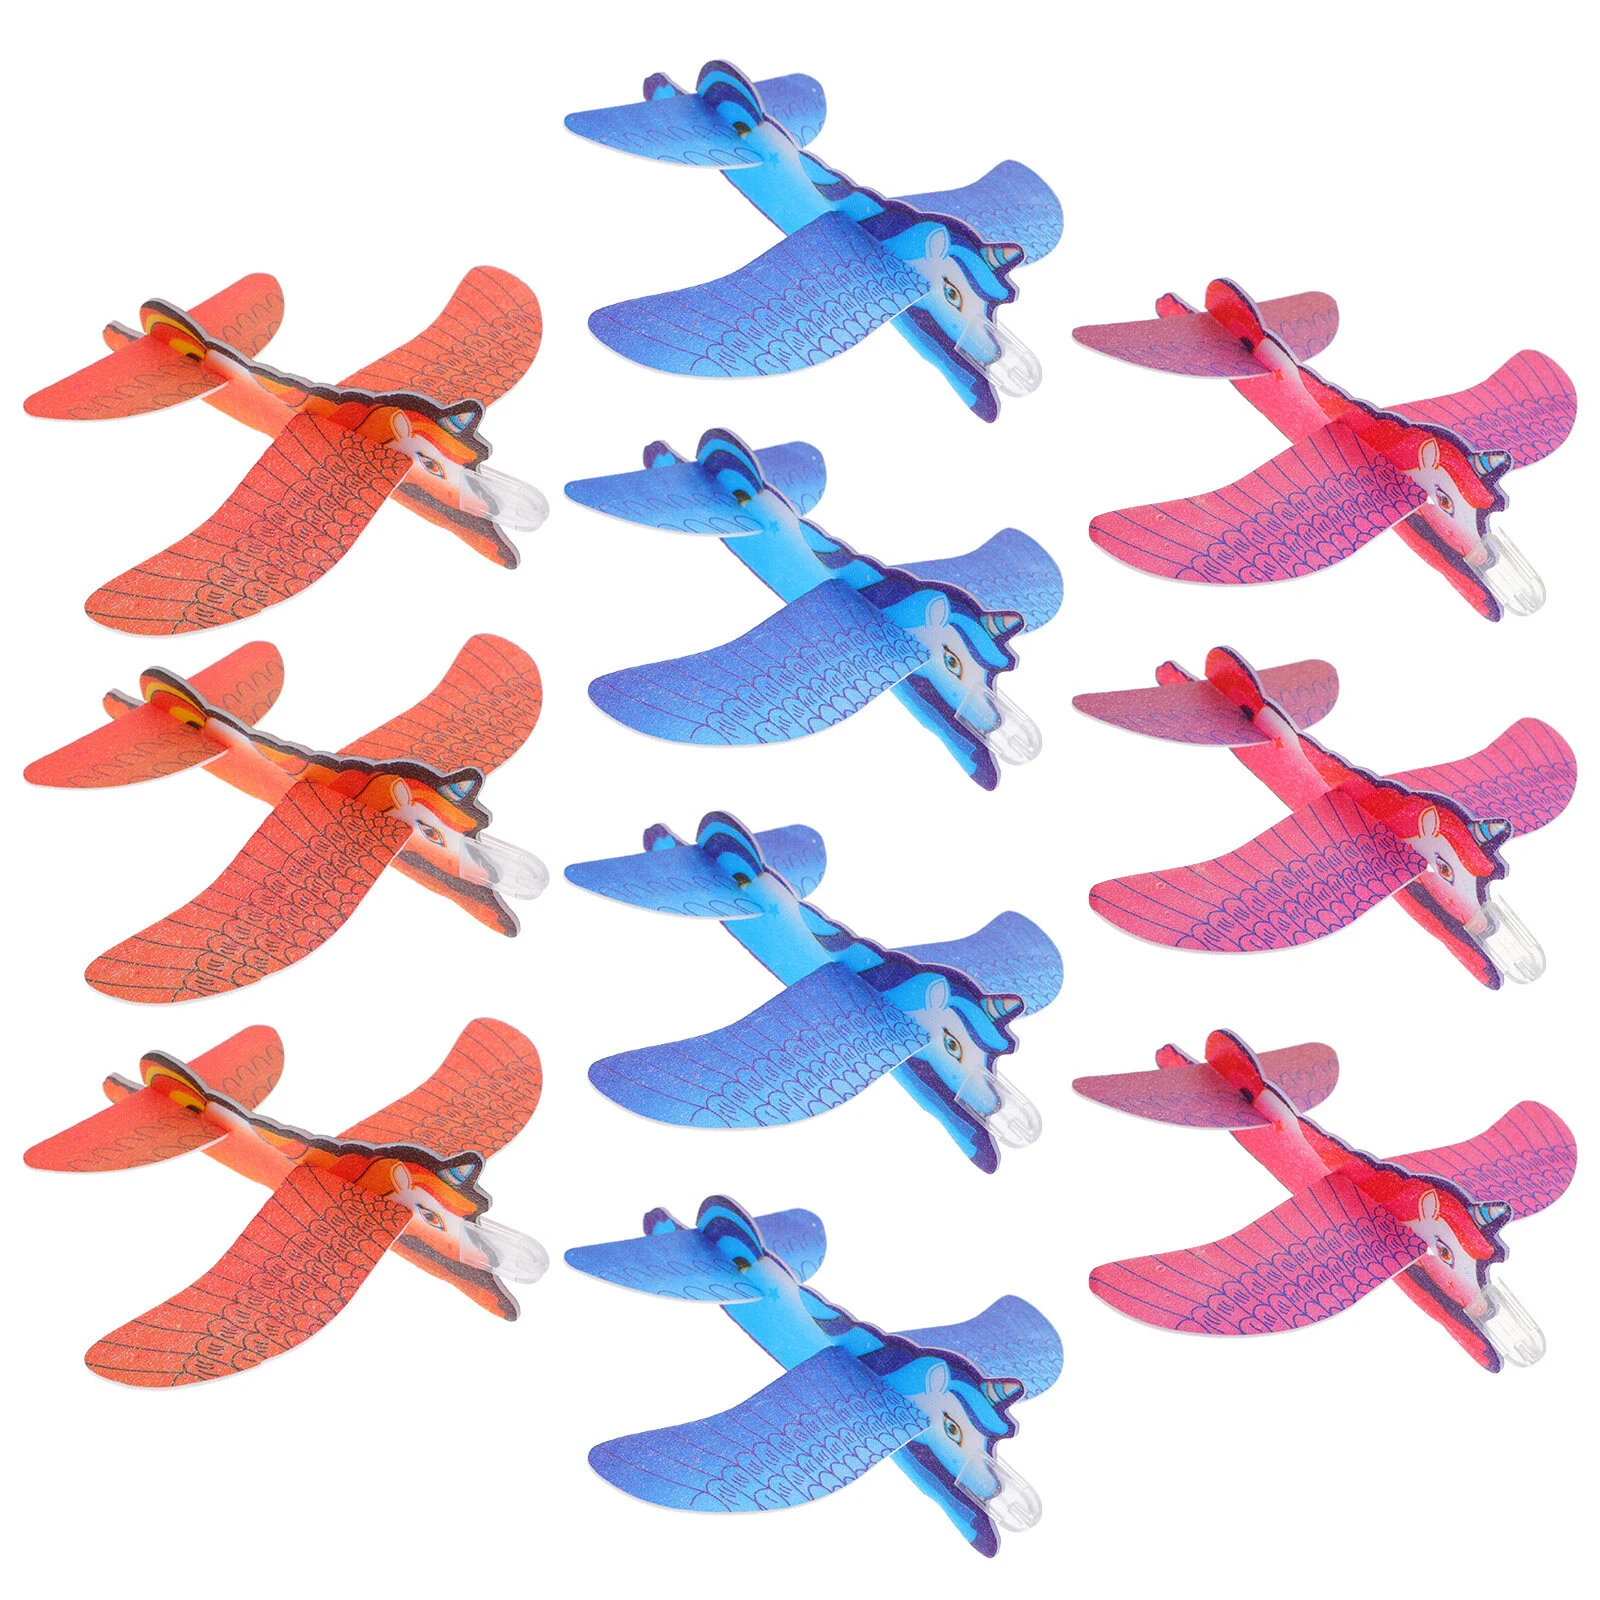 

10 Pcs Unicorn Plane Flying Toy Kids Toys Boys Airplanes Party Favors Foams Gliders Childrens Outdoor Playsets